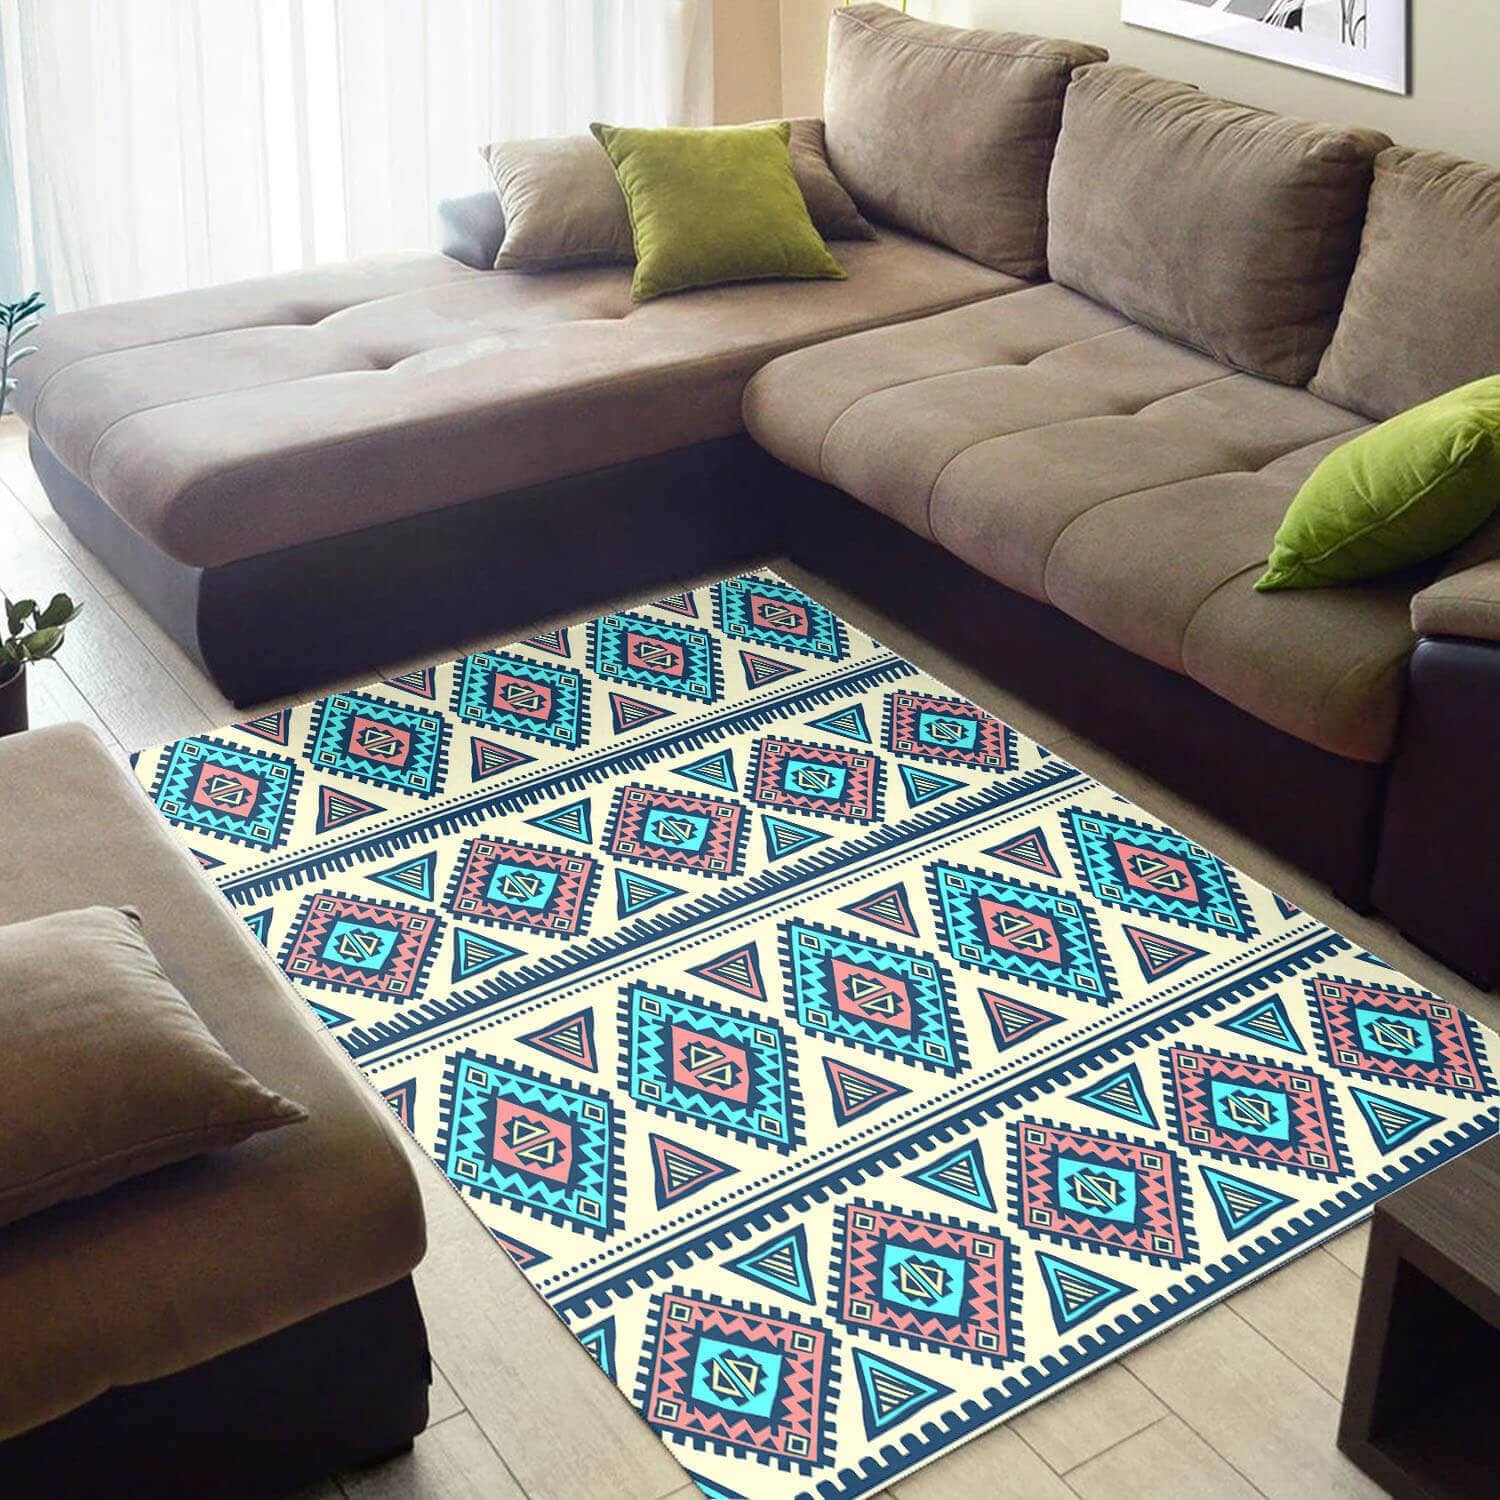 Cool African American Unique Natural Hair Seamless Pattern Design Floor Carpet Themed Home Rug